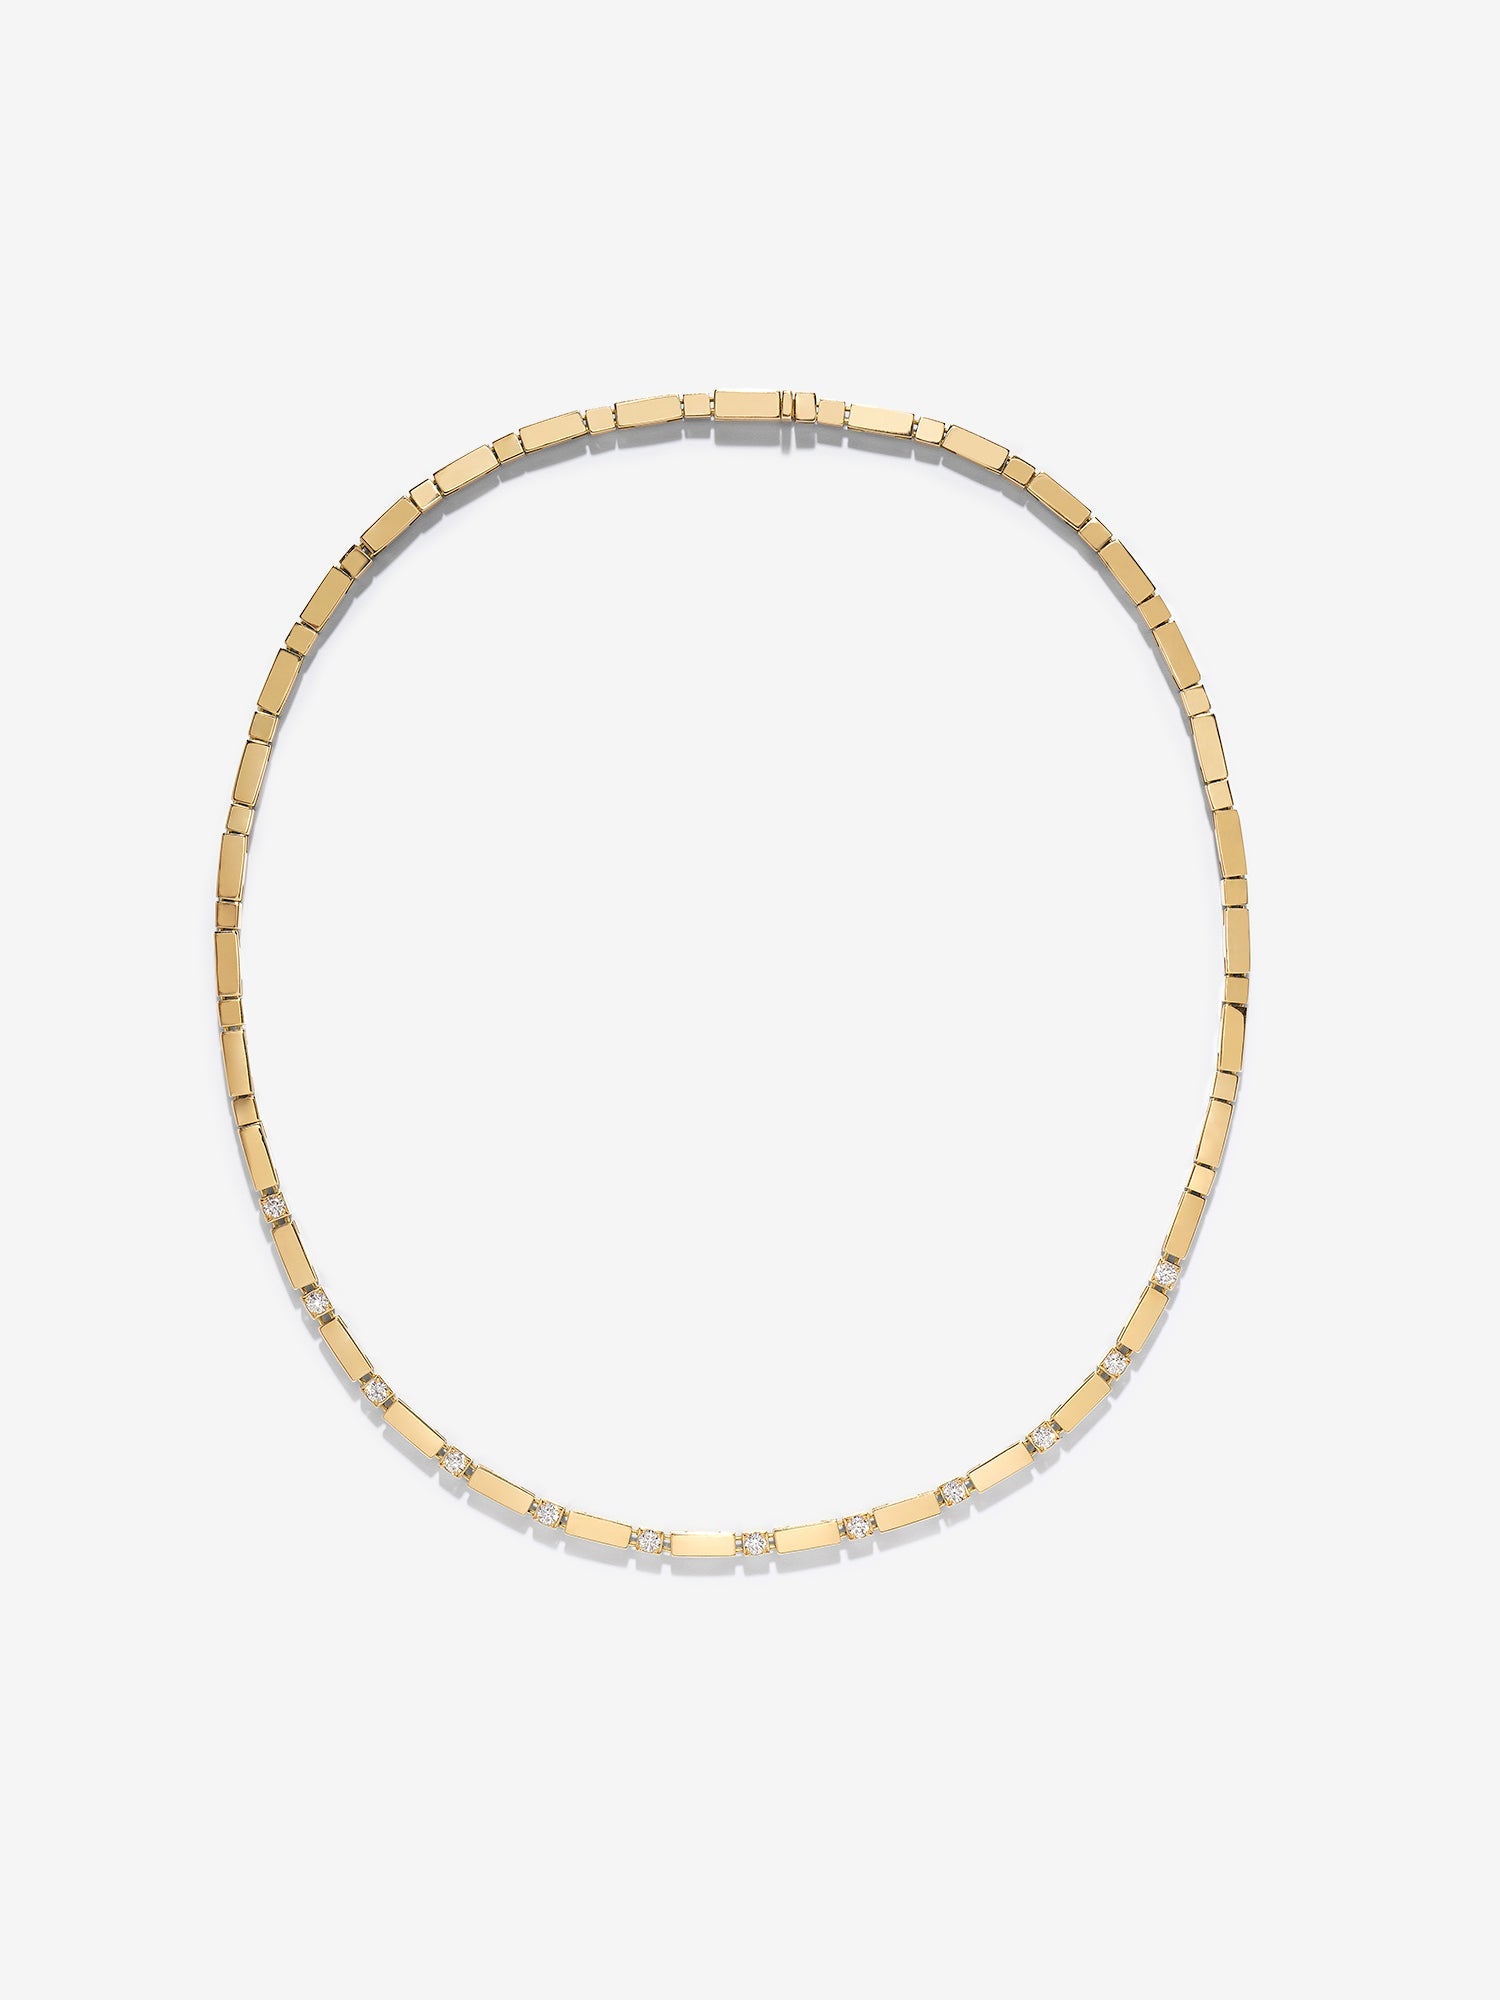 Gold Bar and Diamond Tennis Necklace